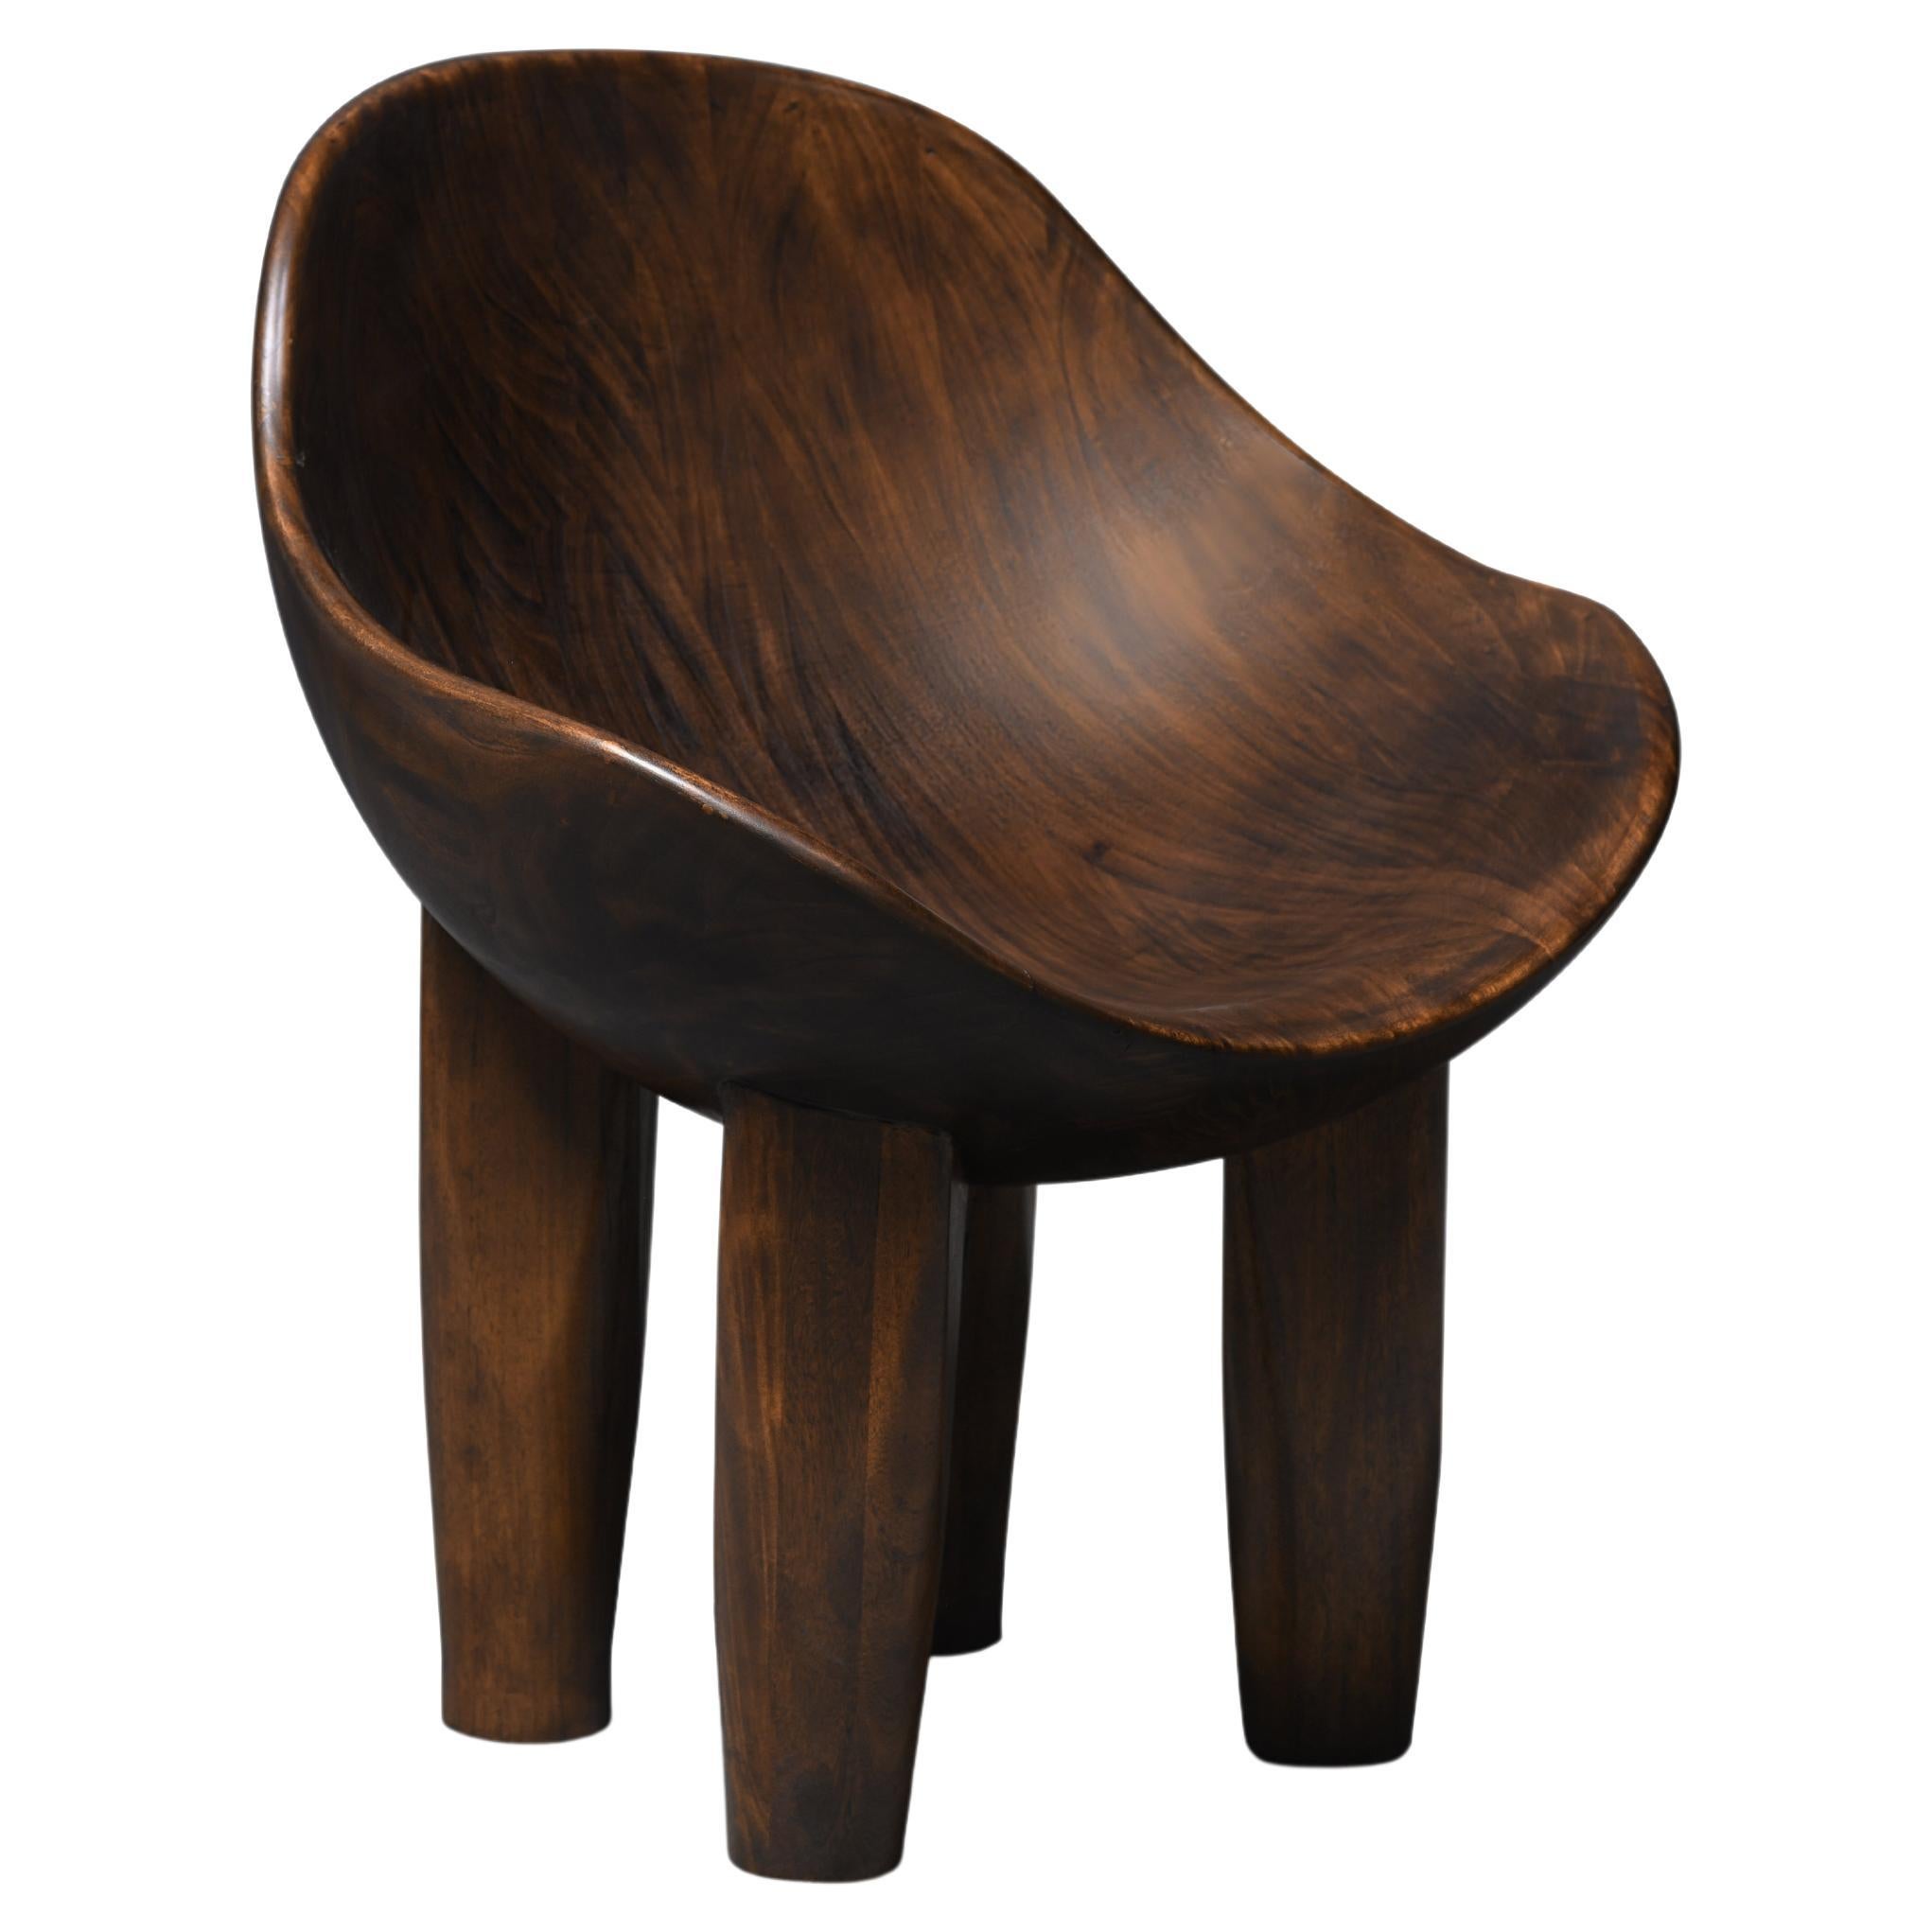 The Aman chair is fully sculpted from solid wood with concave shape